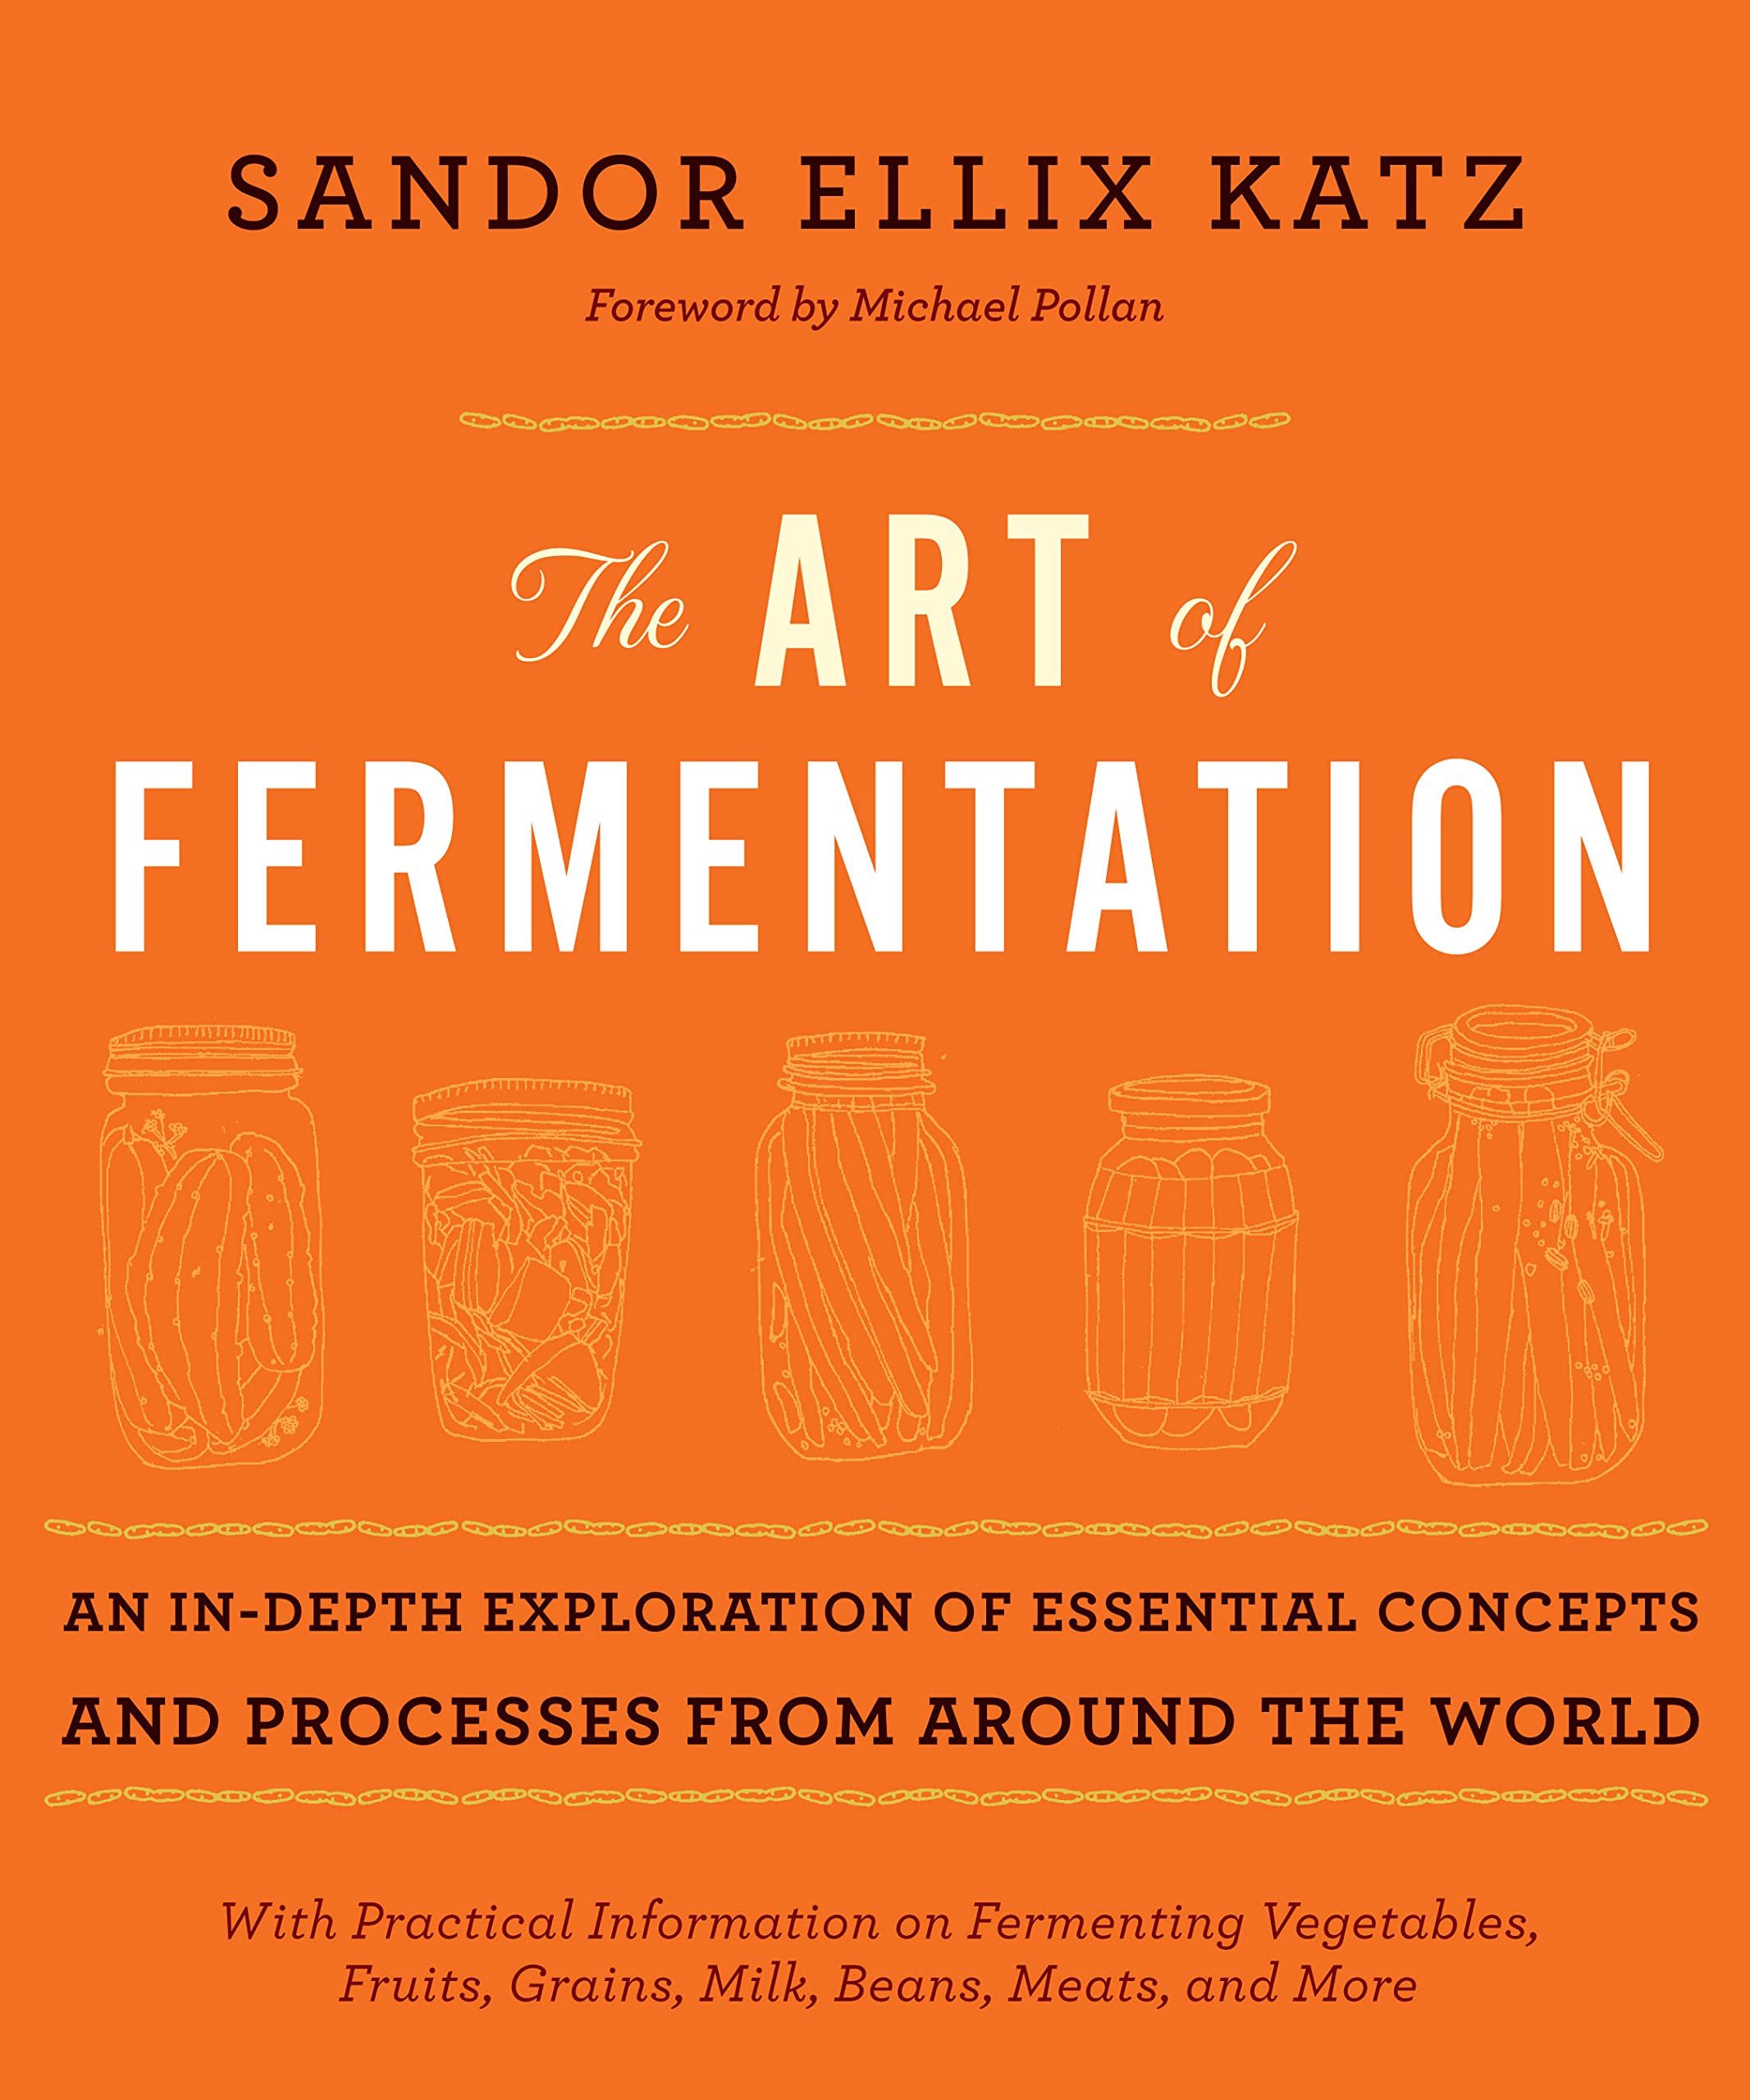 The Art of Fermentation Review: An Exploration of Essential Concepts and Processes from Around the World by a Sandor Elix Katz